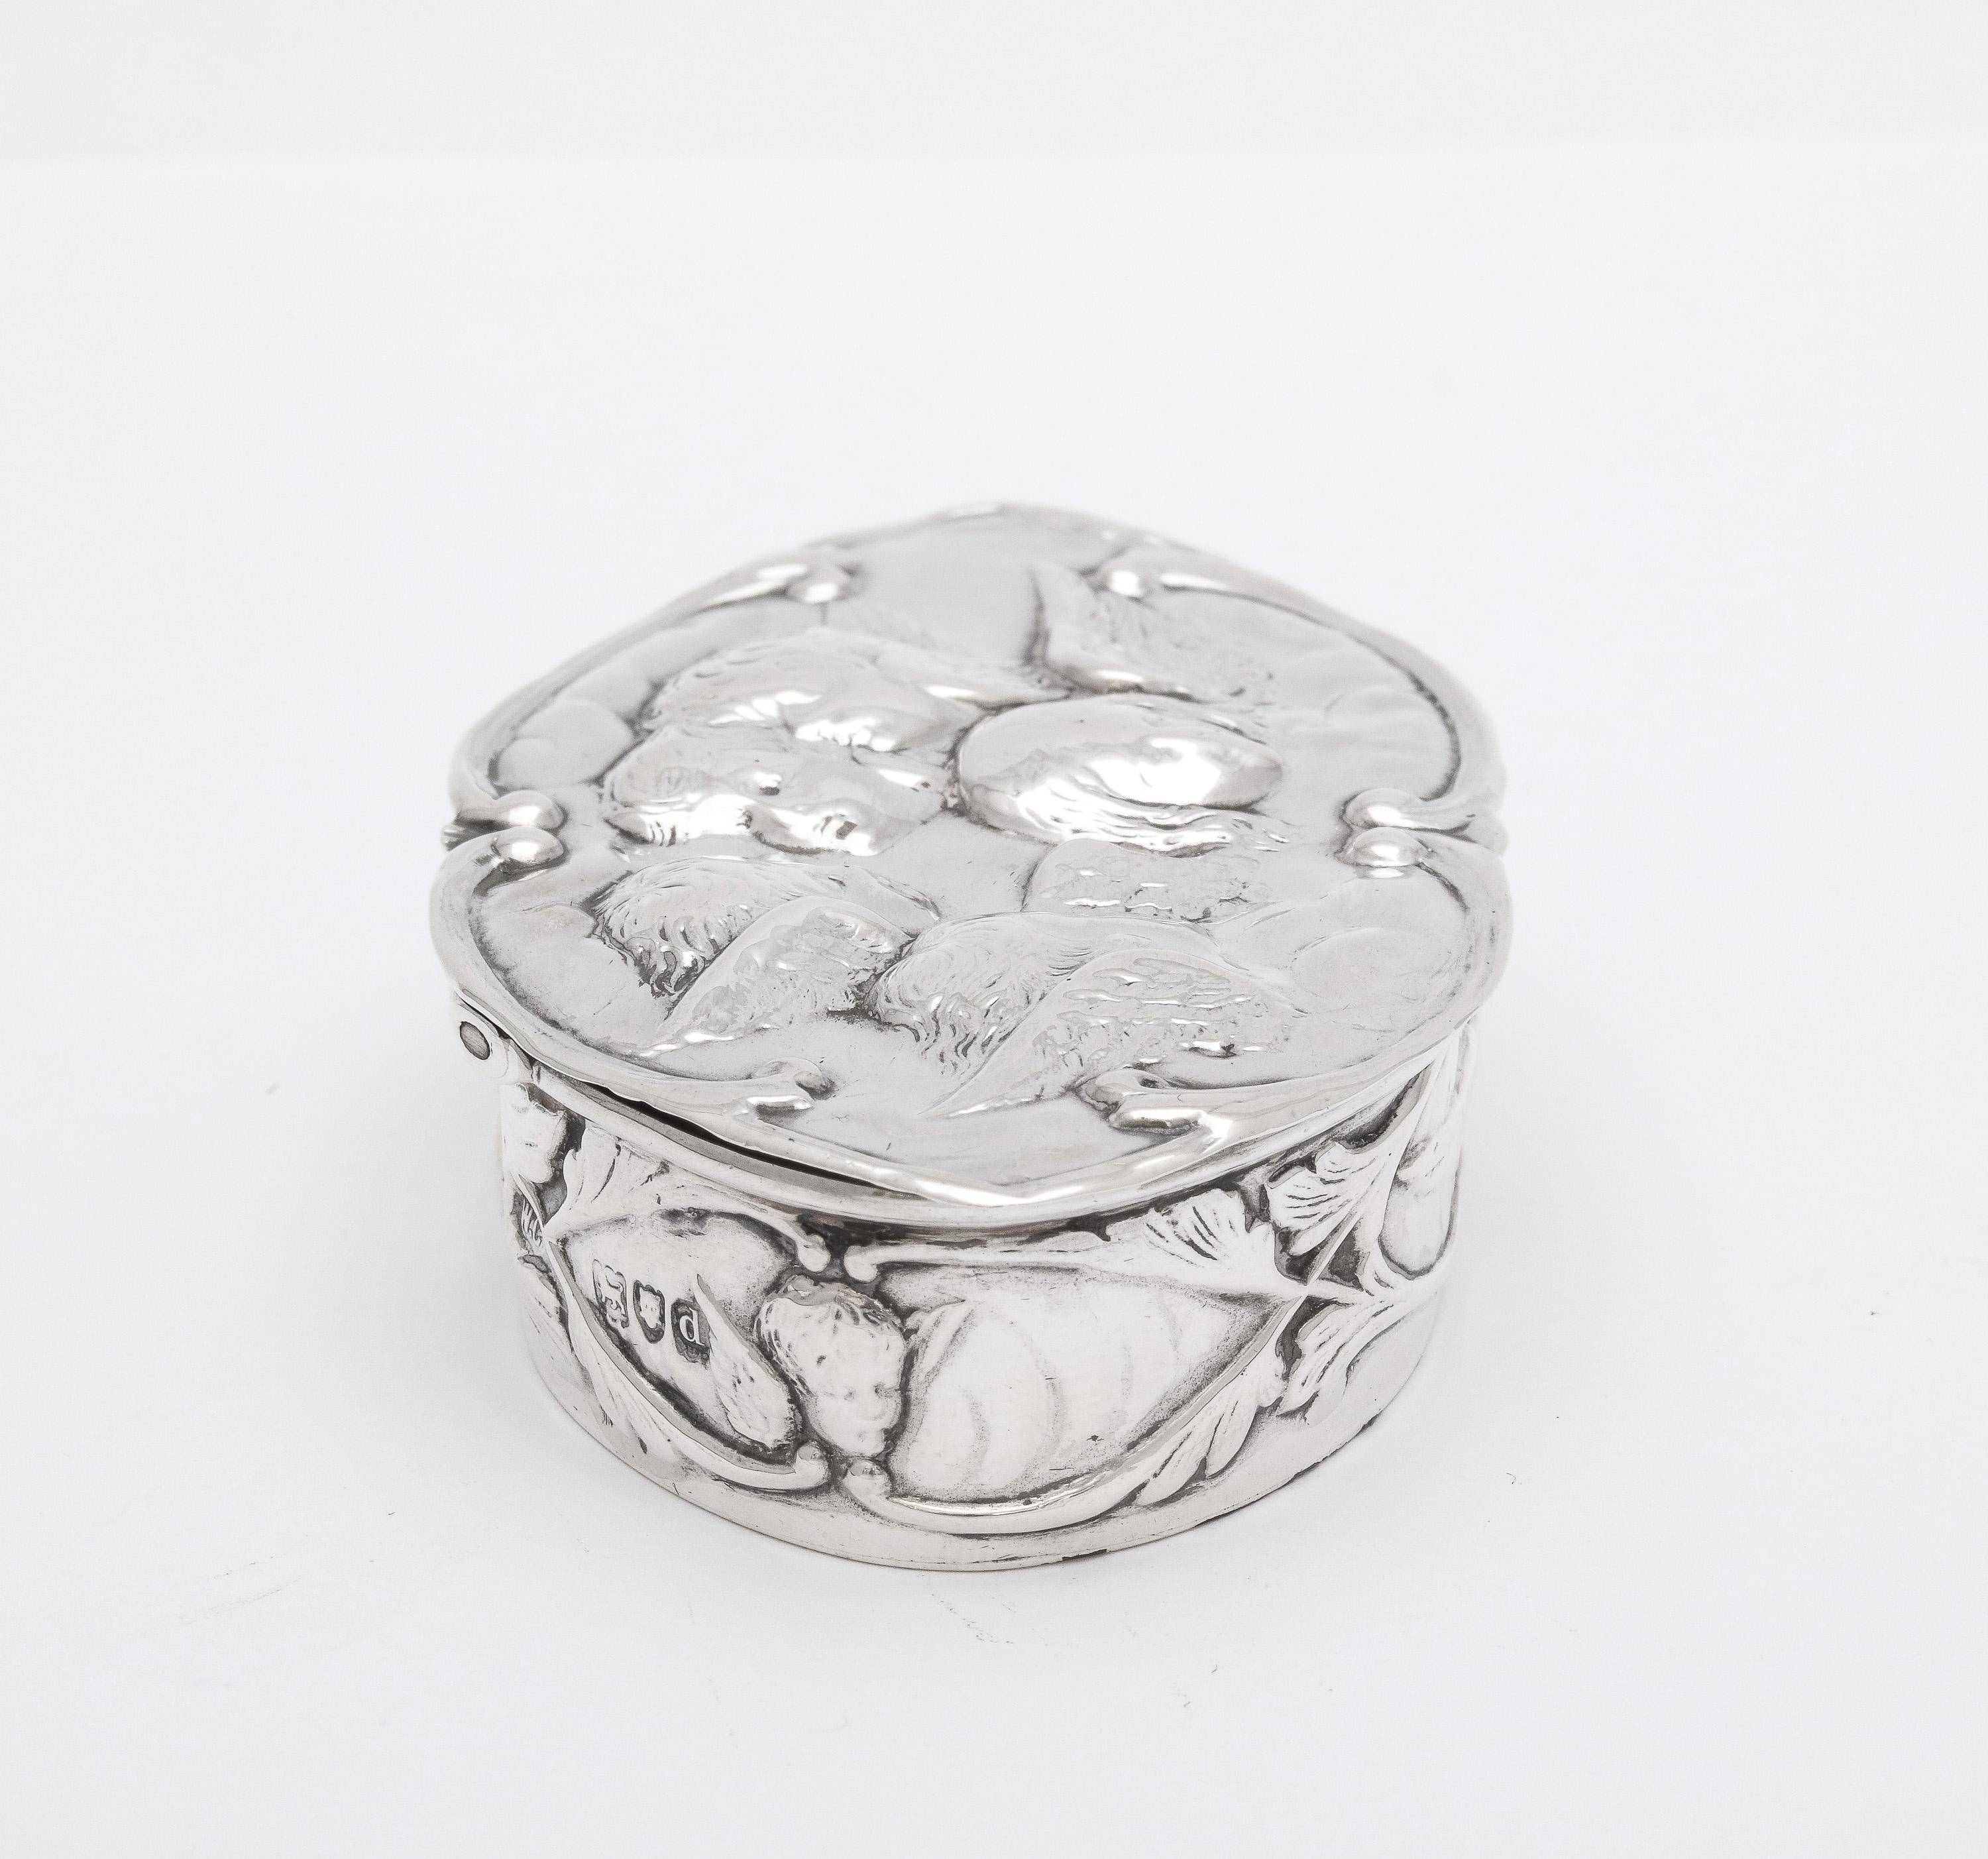 Late 19th Century Victorian Period Sterling Silver Trinkets Box With Hinged Lid by William Comyns